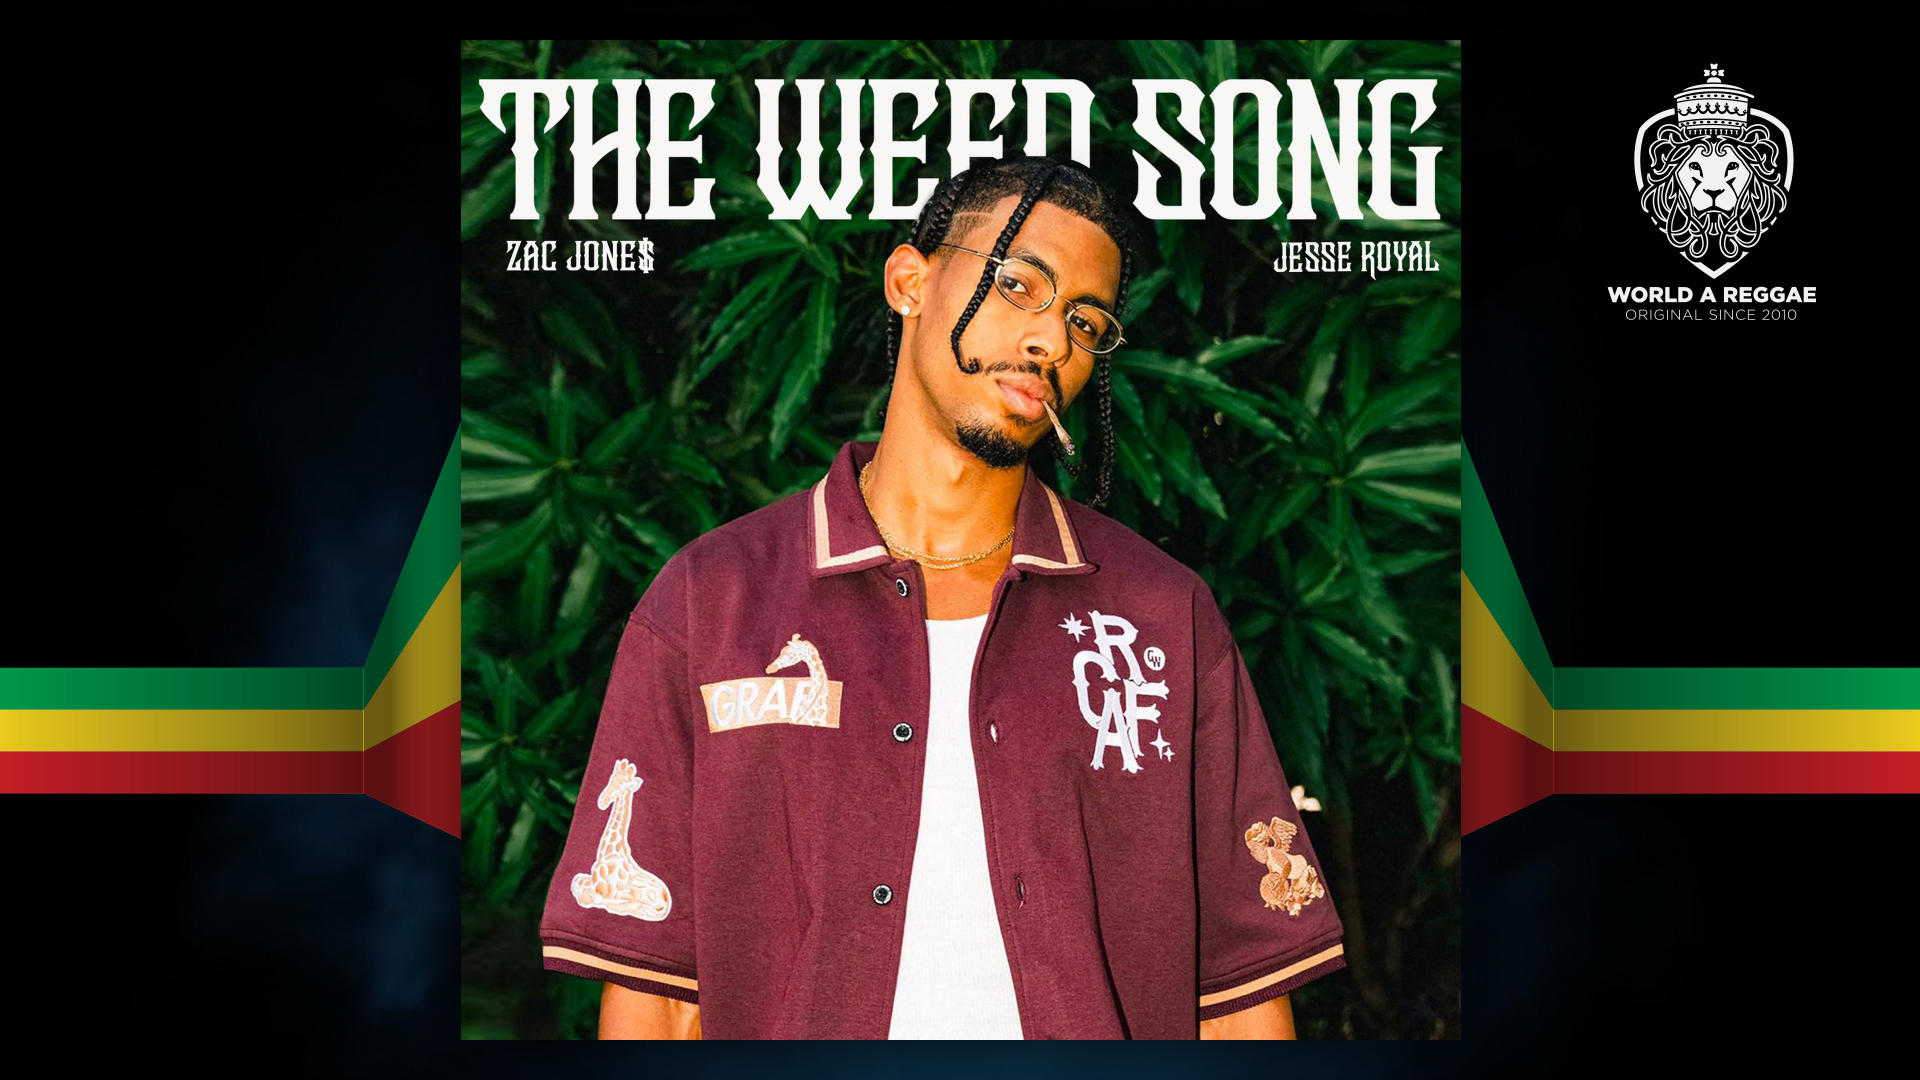 ZAC JONE$ "THE WEED SONG" FT. JESSE ROYAL